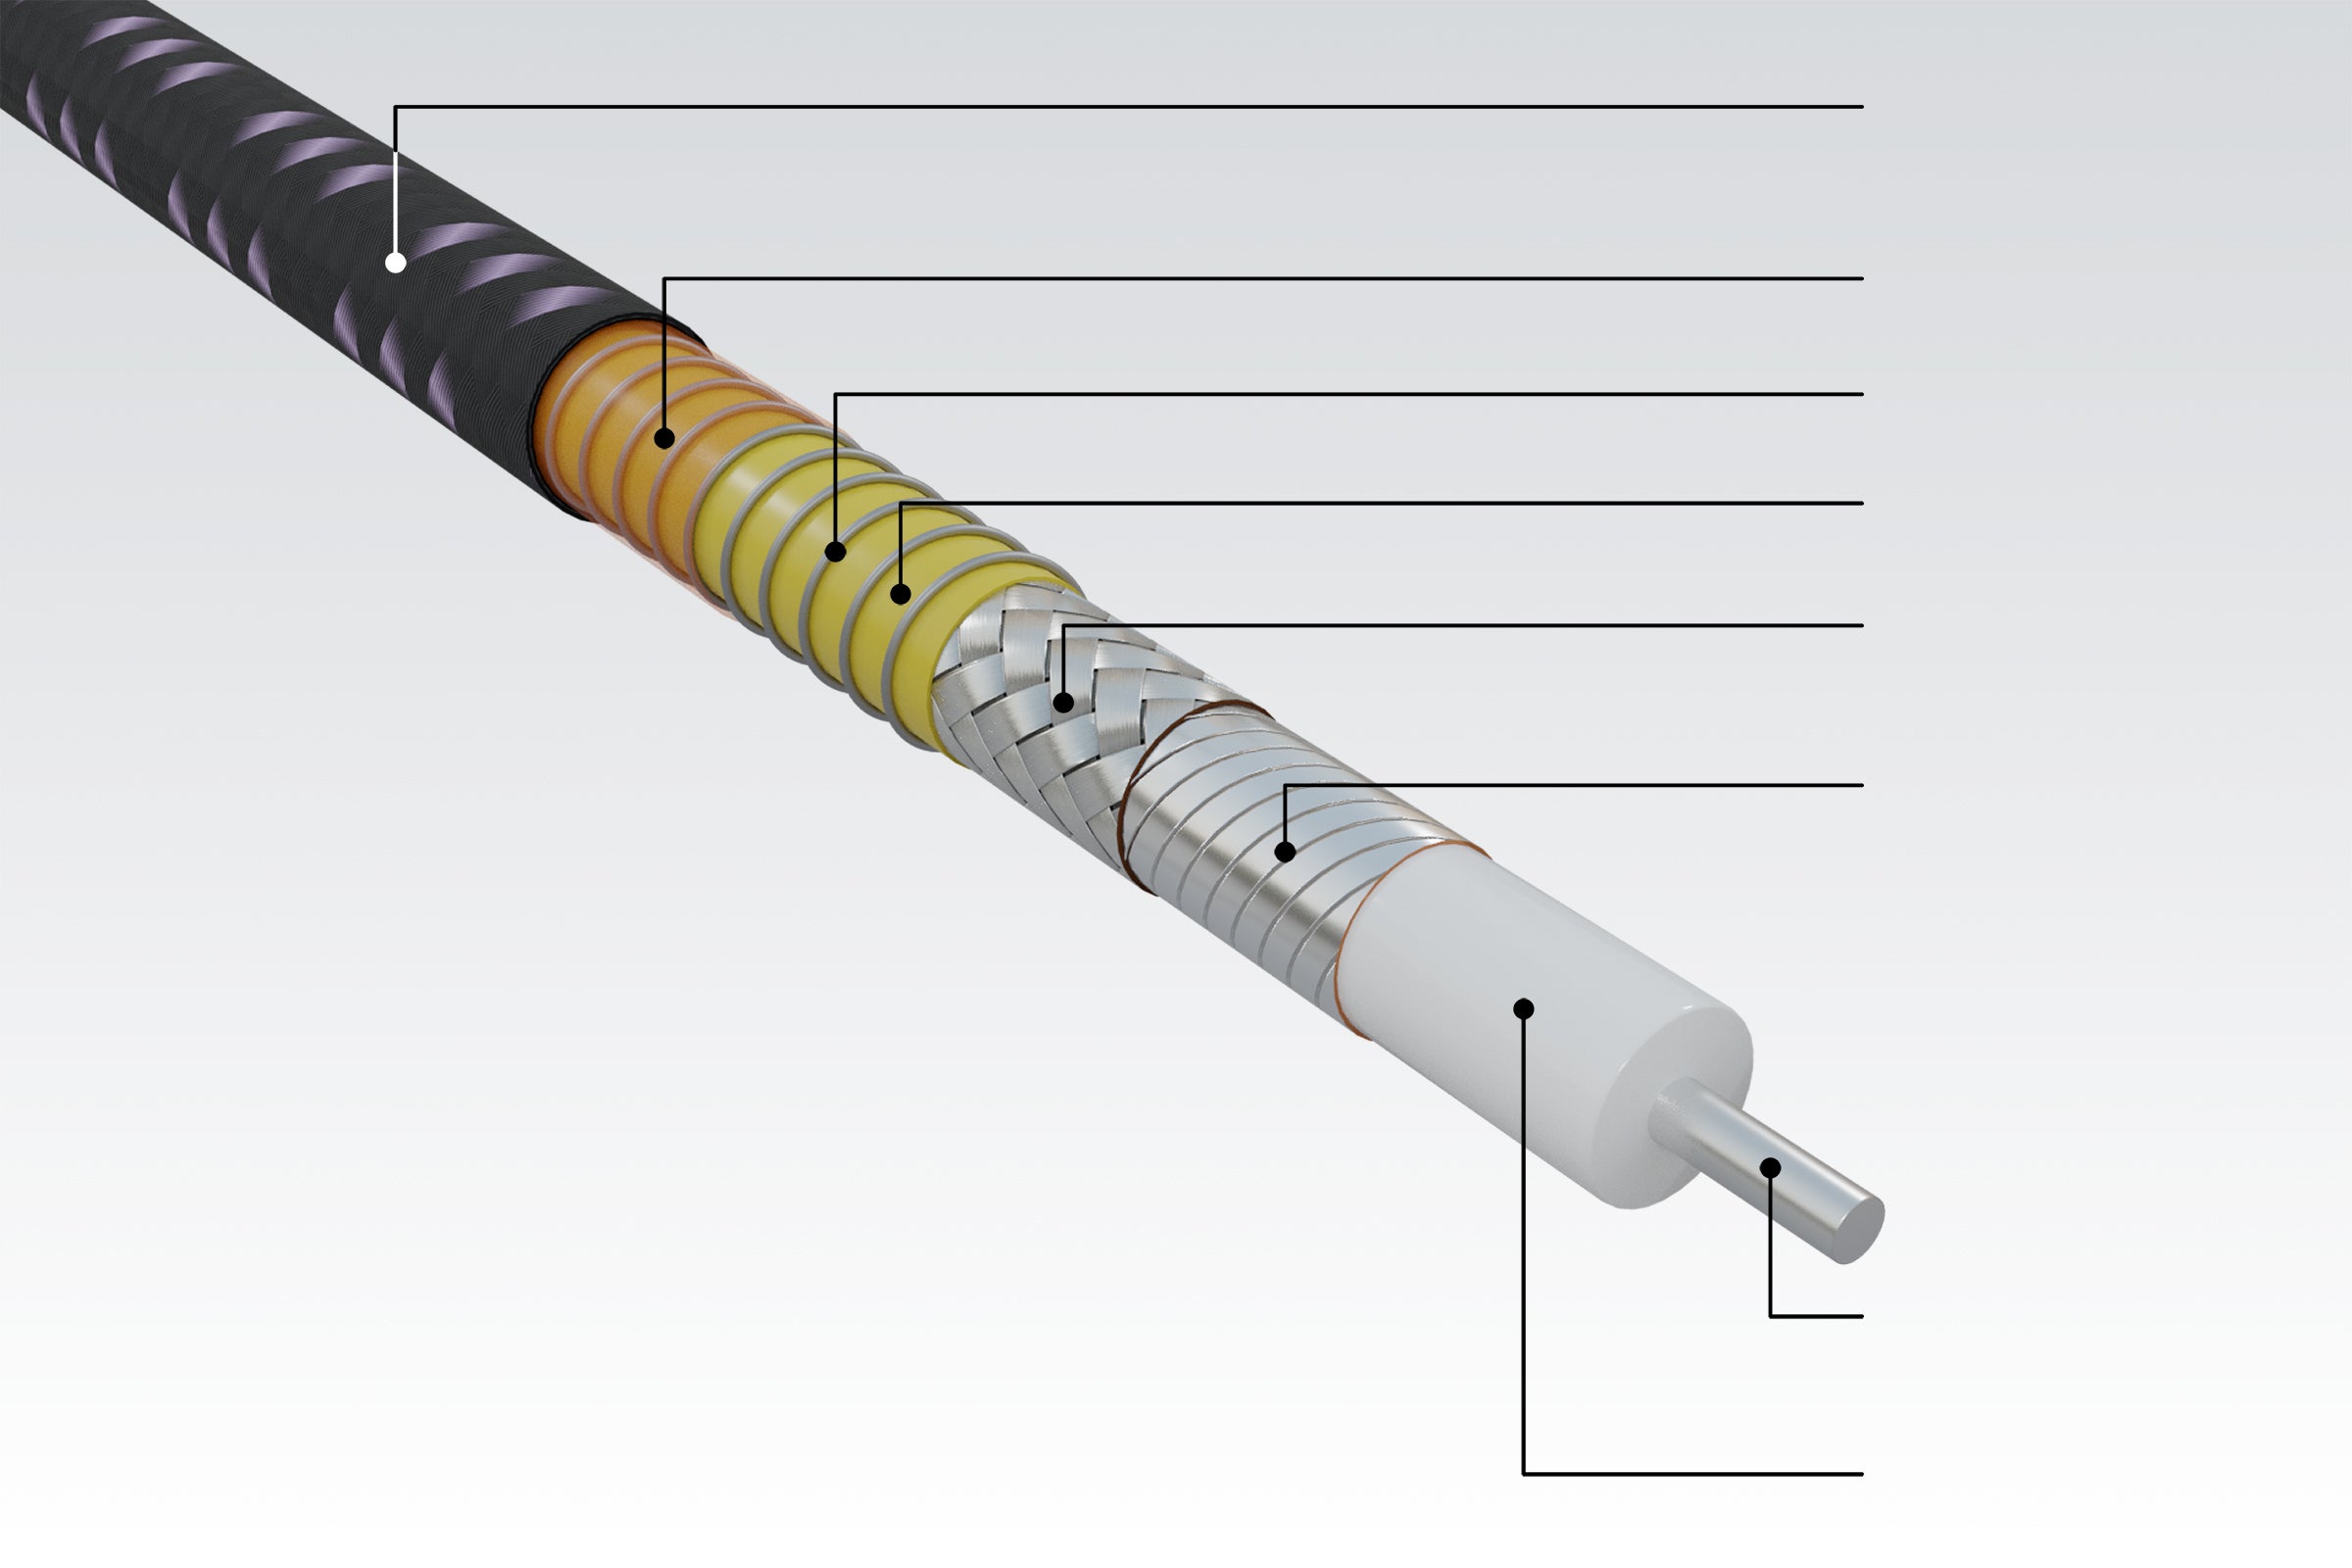 Image of cable construction of GORE-FLIGHT Microwave Assemblies, Types 65 and 6E